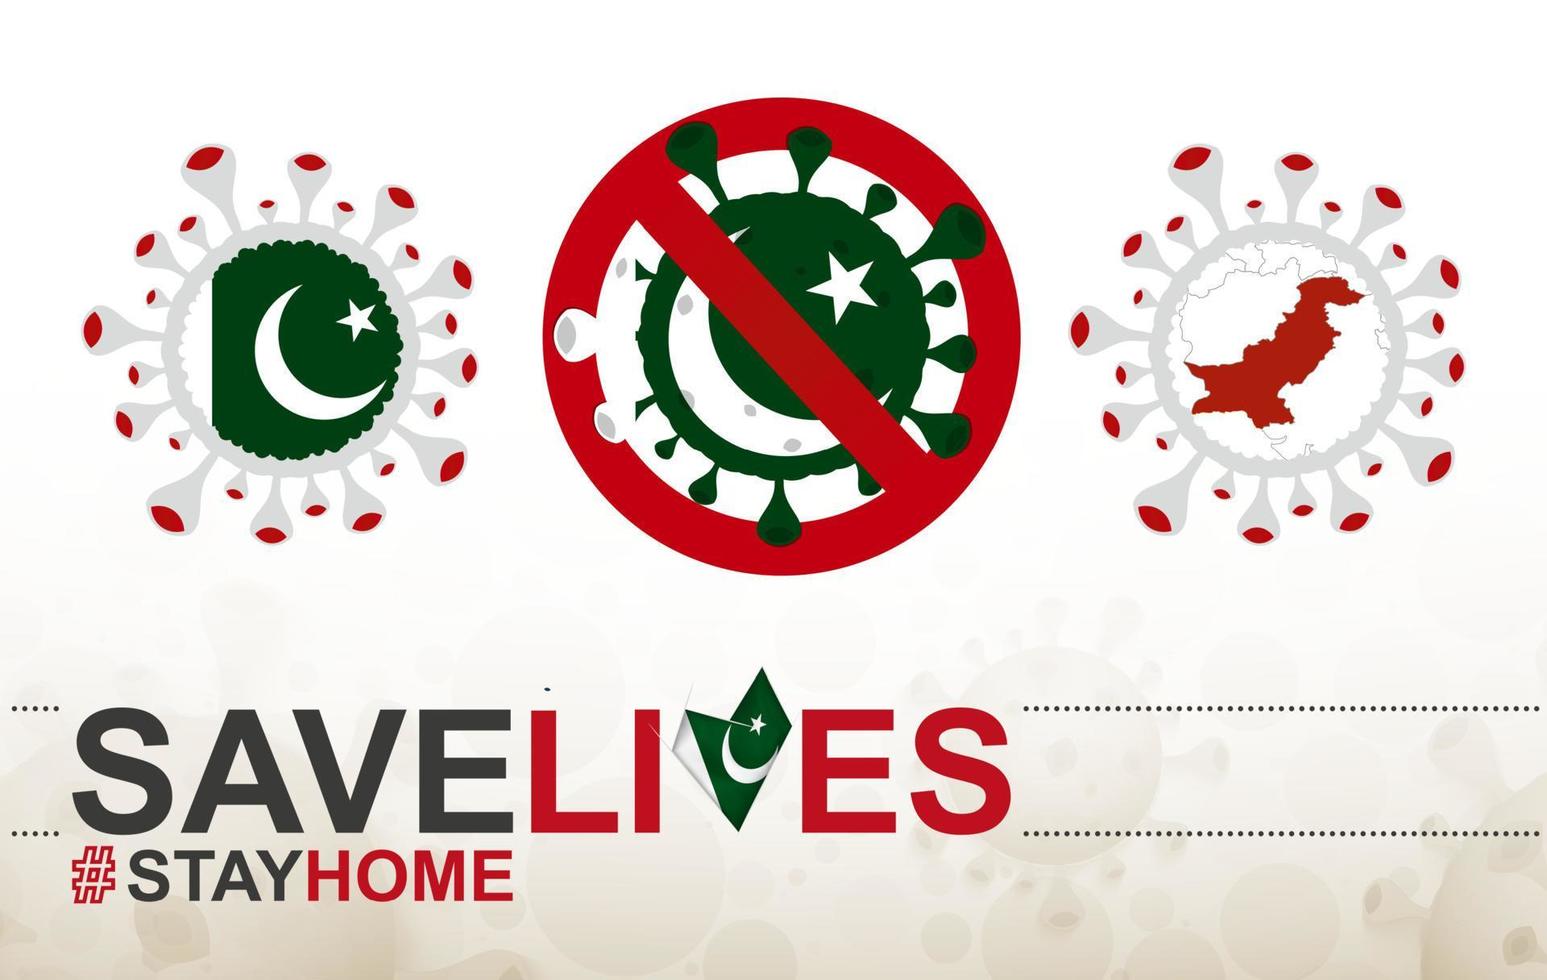 Coronavirus cell with Pakistan flag and map. Stop COVID-19 sign, slogan save lives stay home with flag of Pakistan vector